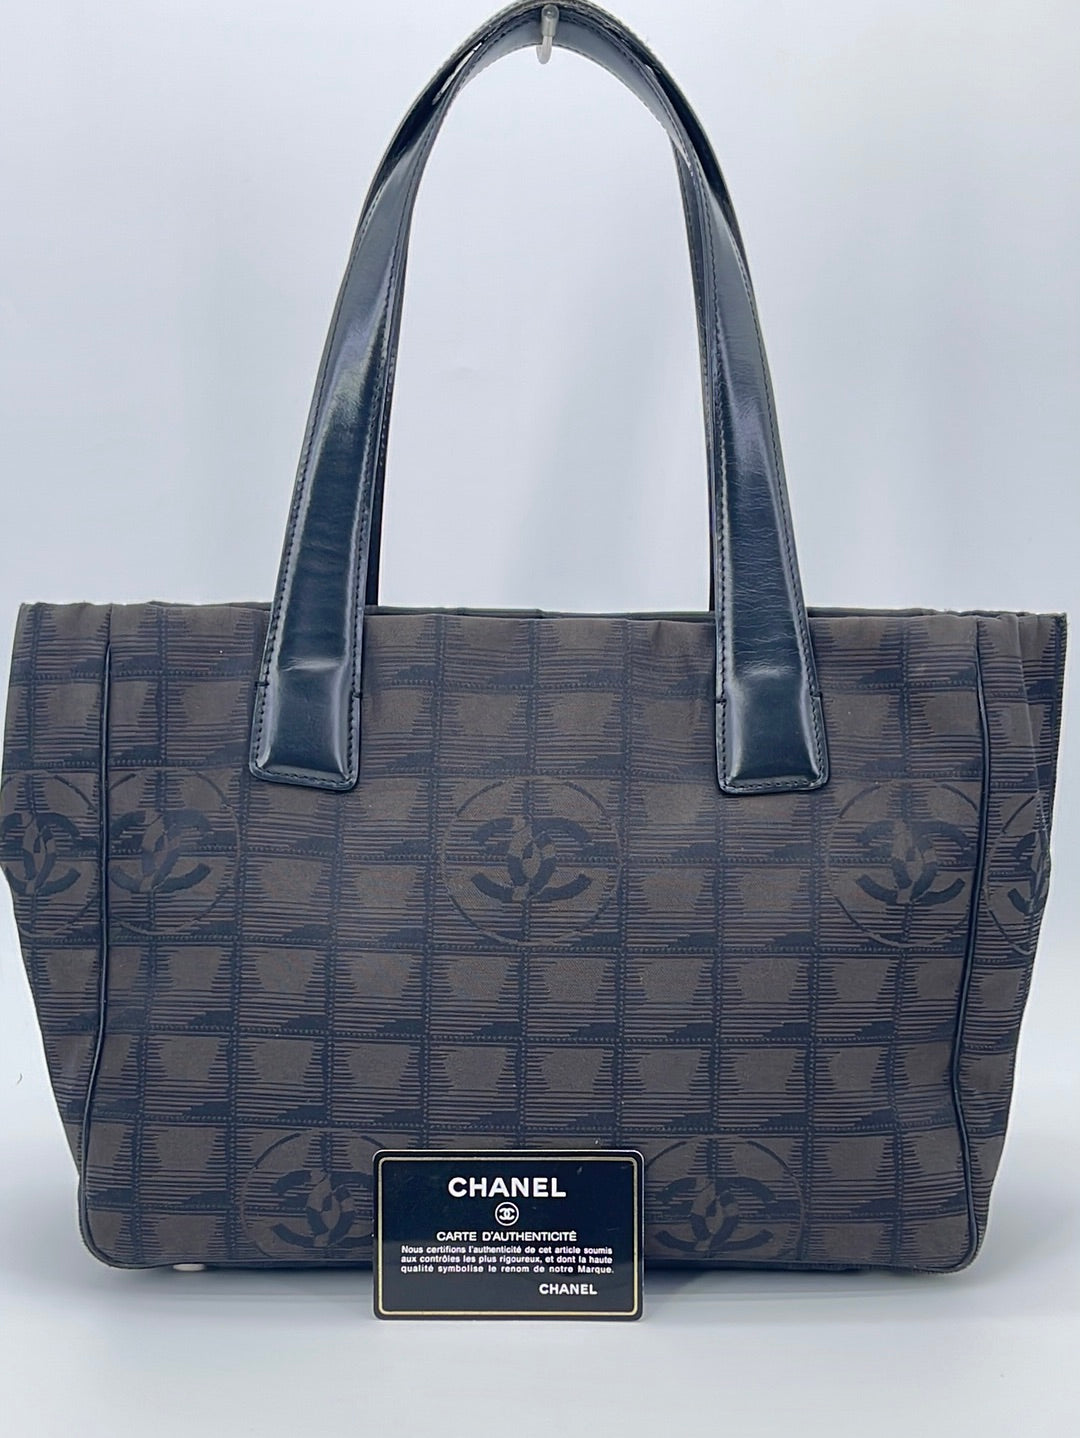 Used chanel QUILTED CAVIAR LEATHER SHOPPING TOTE HANDBAGS